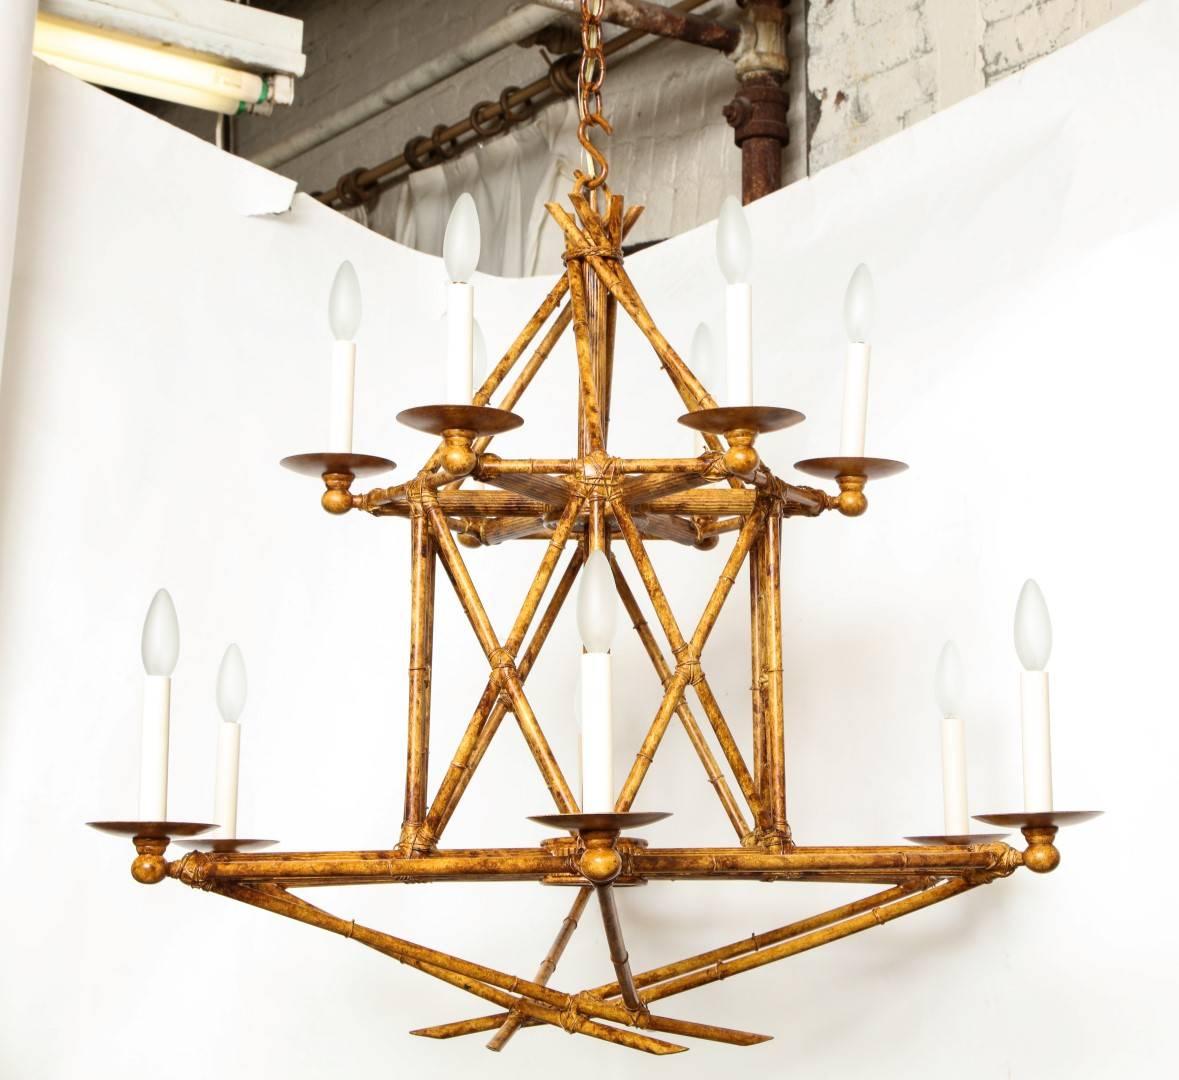 Contemporary Newly Made Twelve-Light Faux Bamboo Chandelier by David Duncan